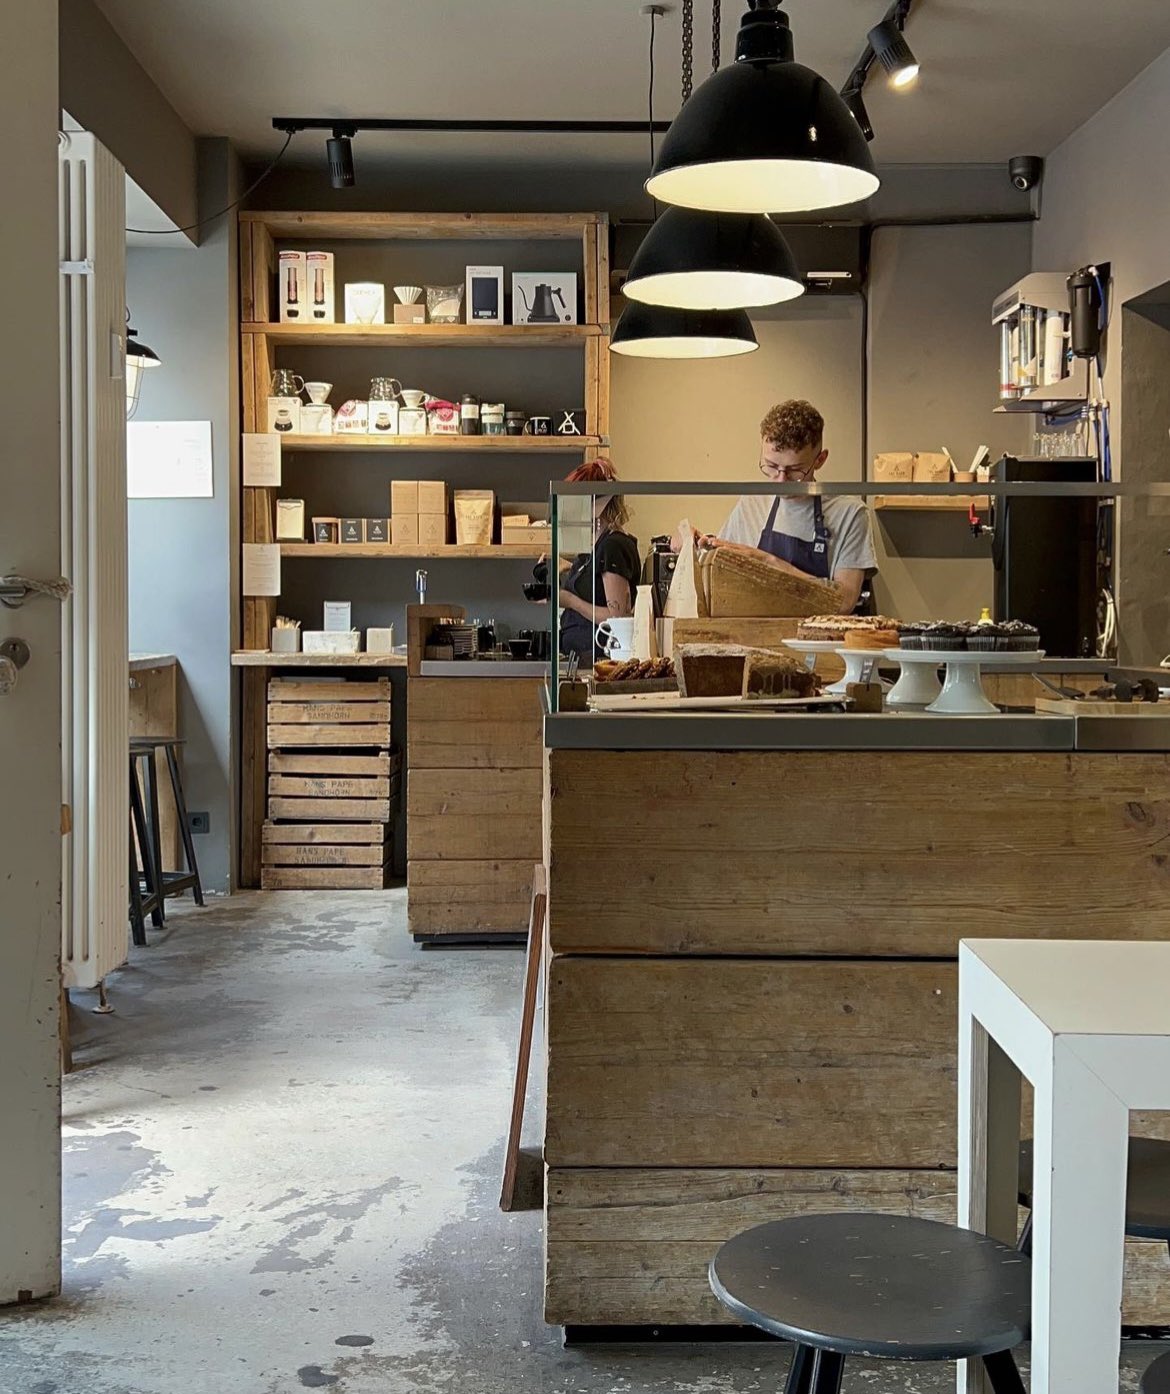 Cafe interior in Mitte, barista focus on a task behind the counter